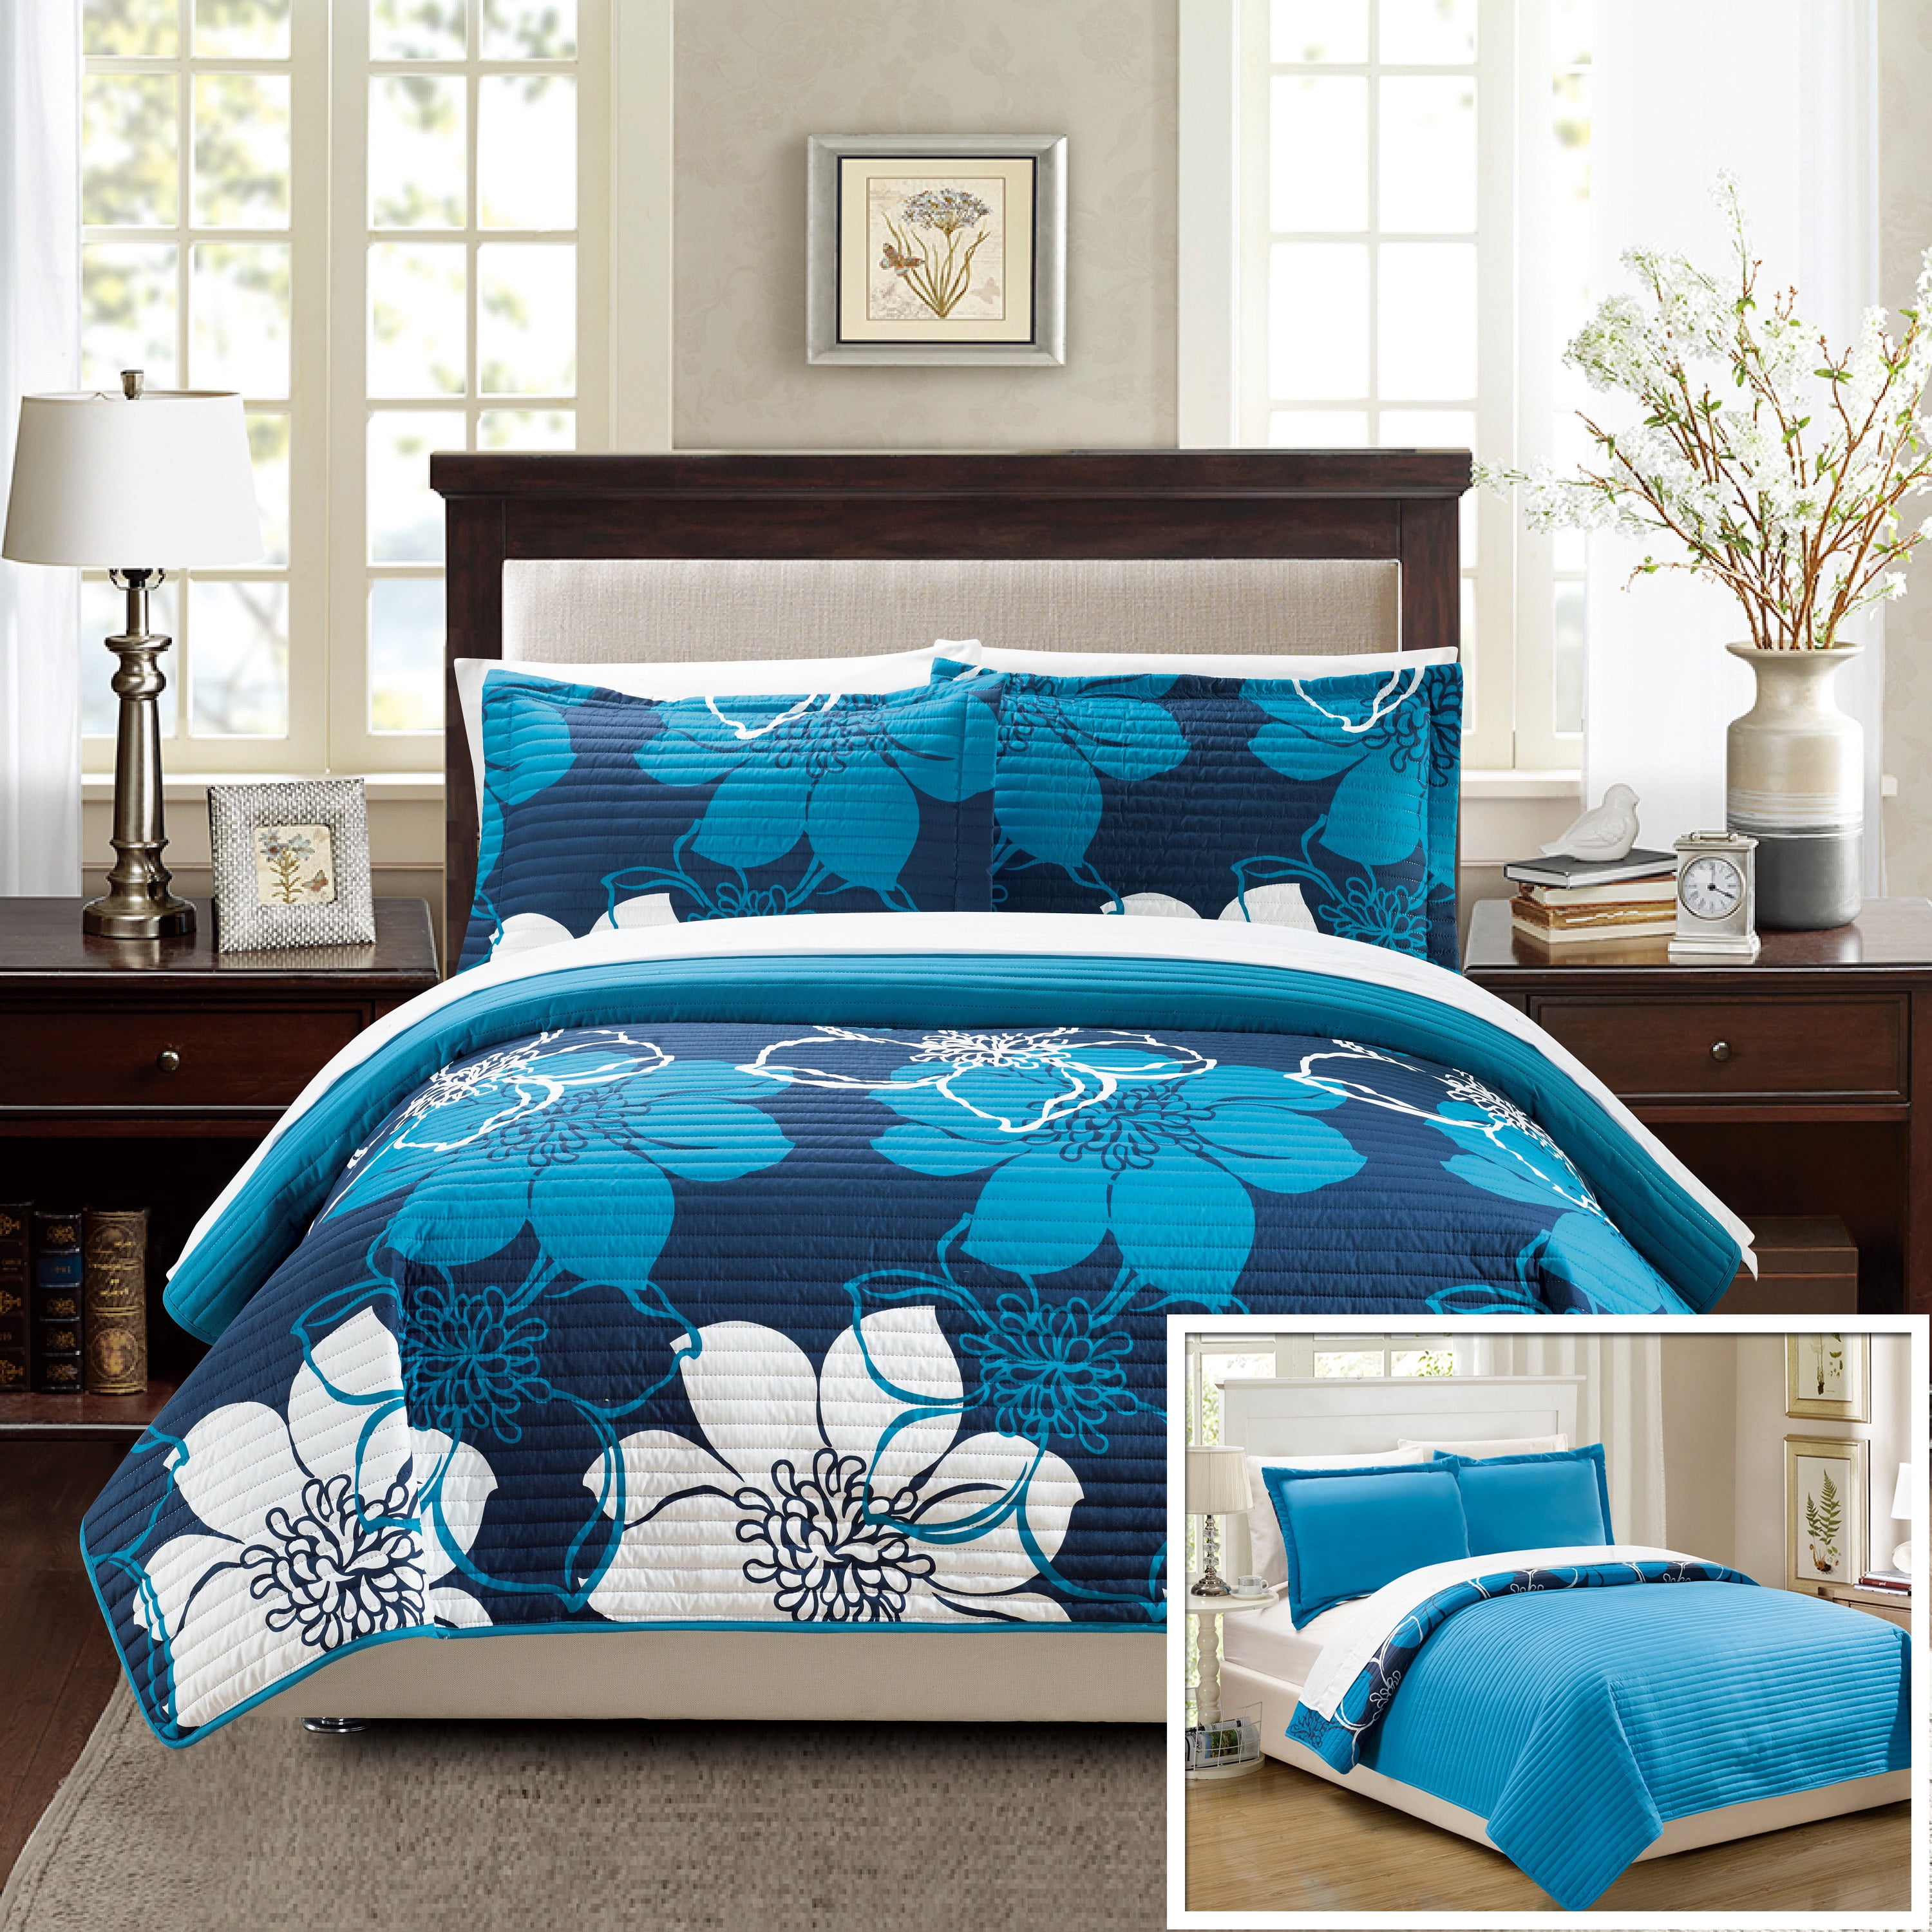 Abstract Floral Print Duvet Cover Reversible Quilt Set & Pillowcases All Sizes 